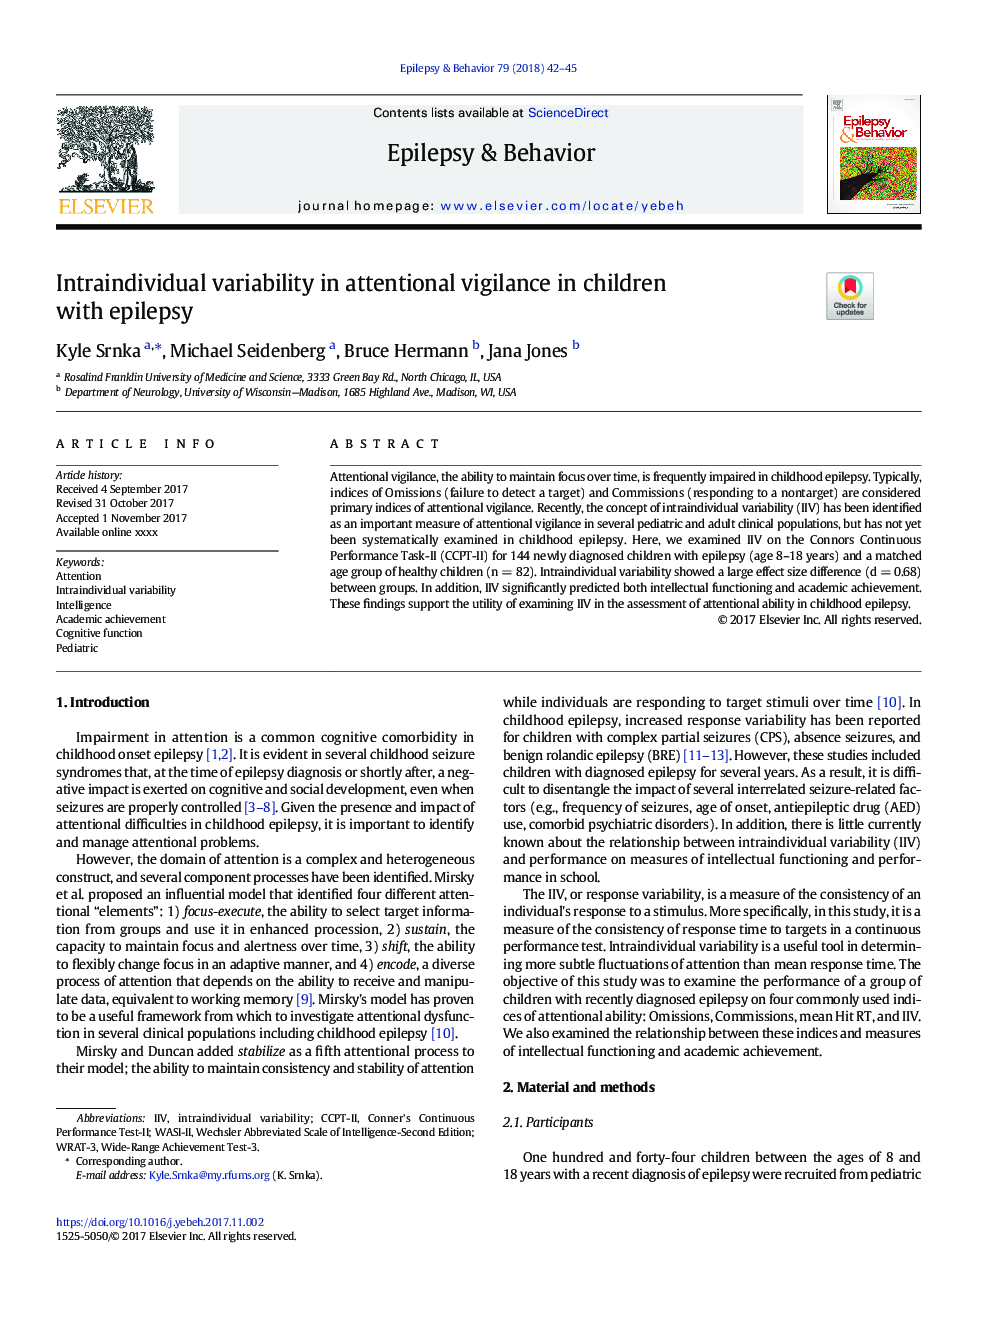 Intraindividual variability in attentional vigilance in children with epilepsy